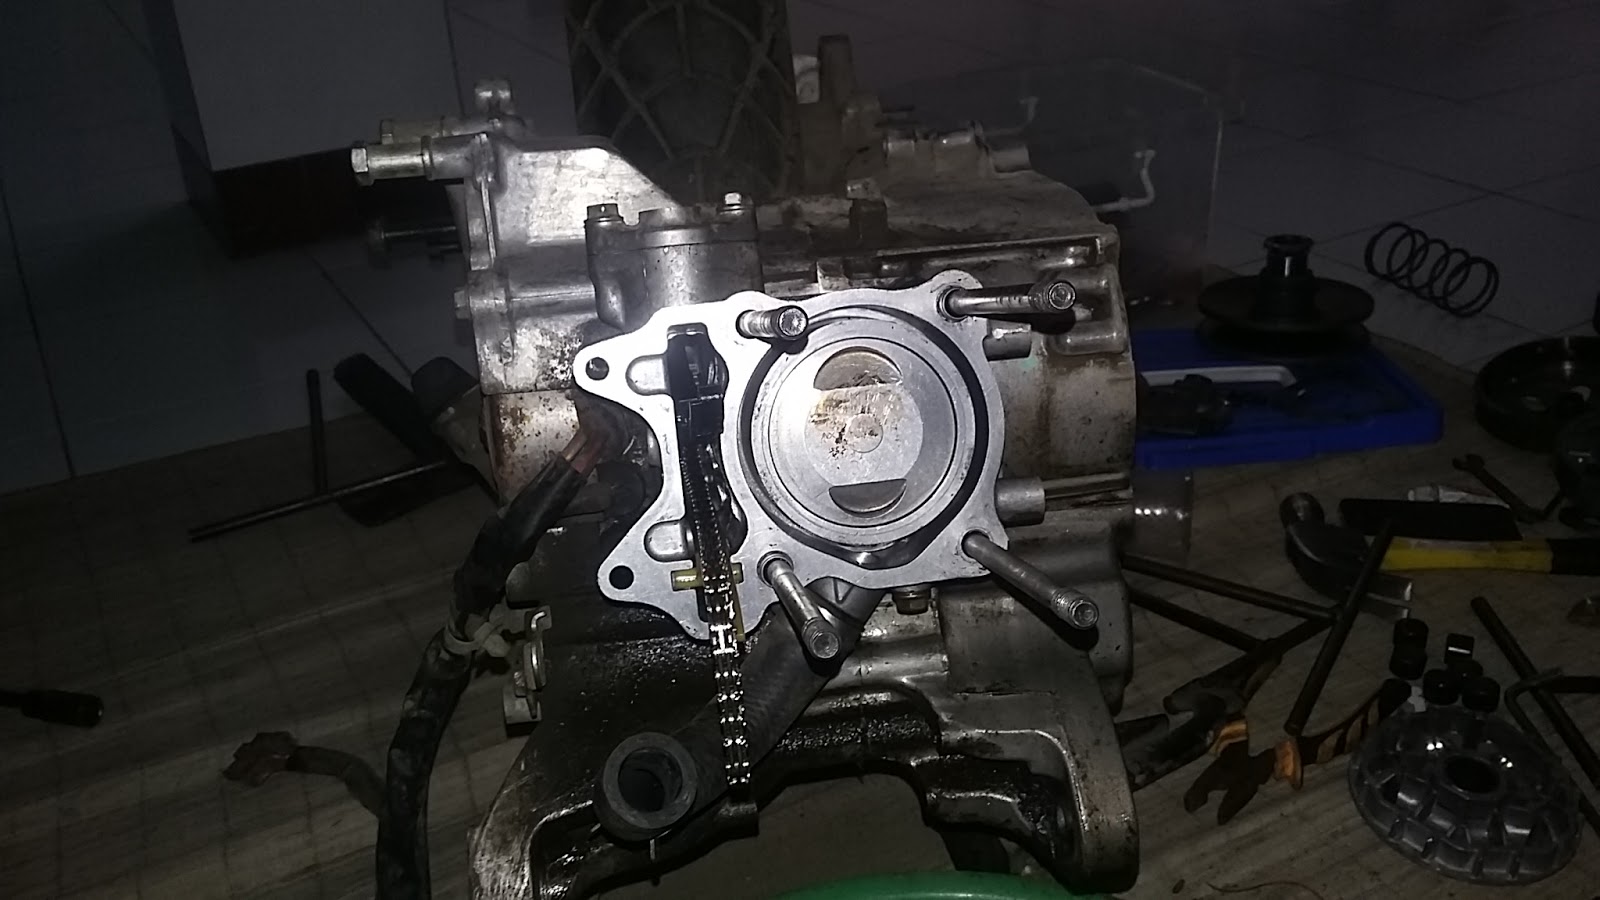 S.B.M Engine Performance: Tune Up Vario 125cc Bore Up To 